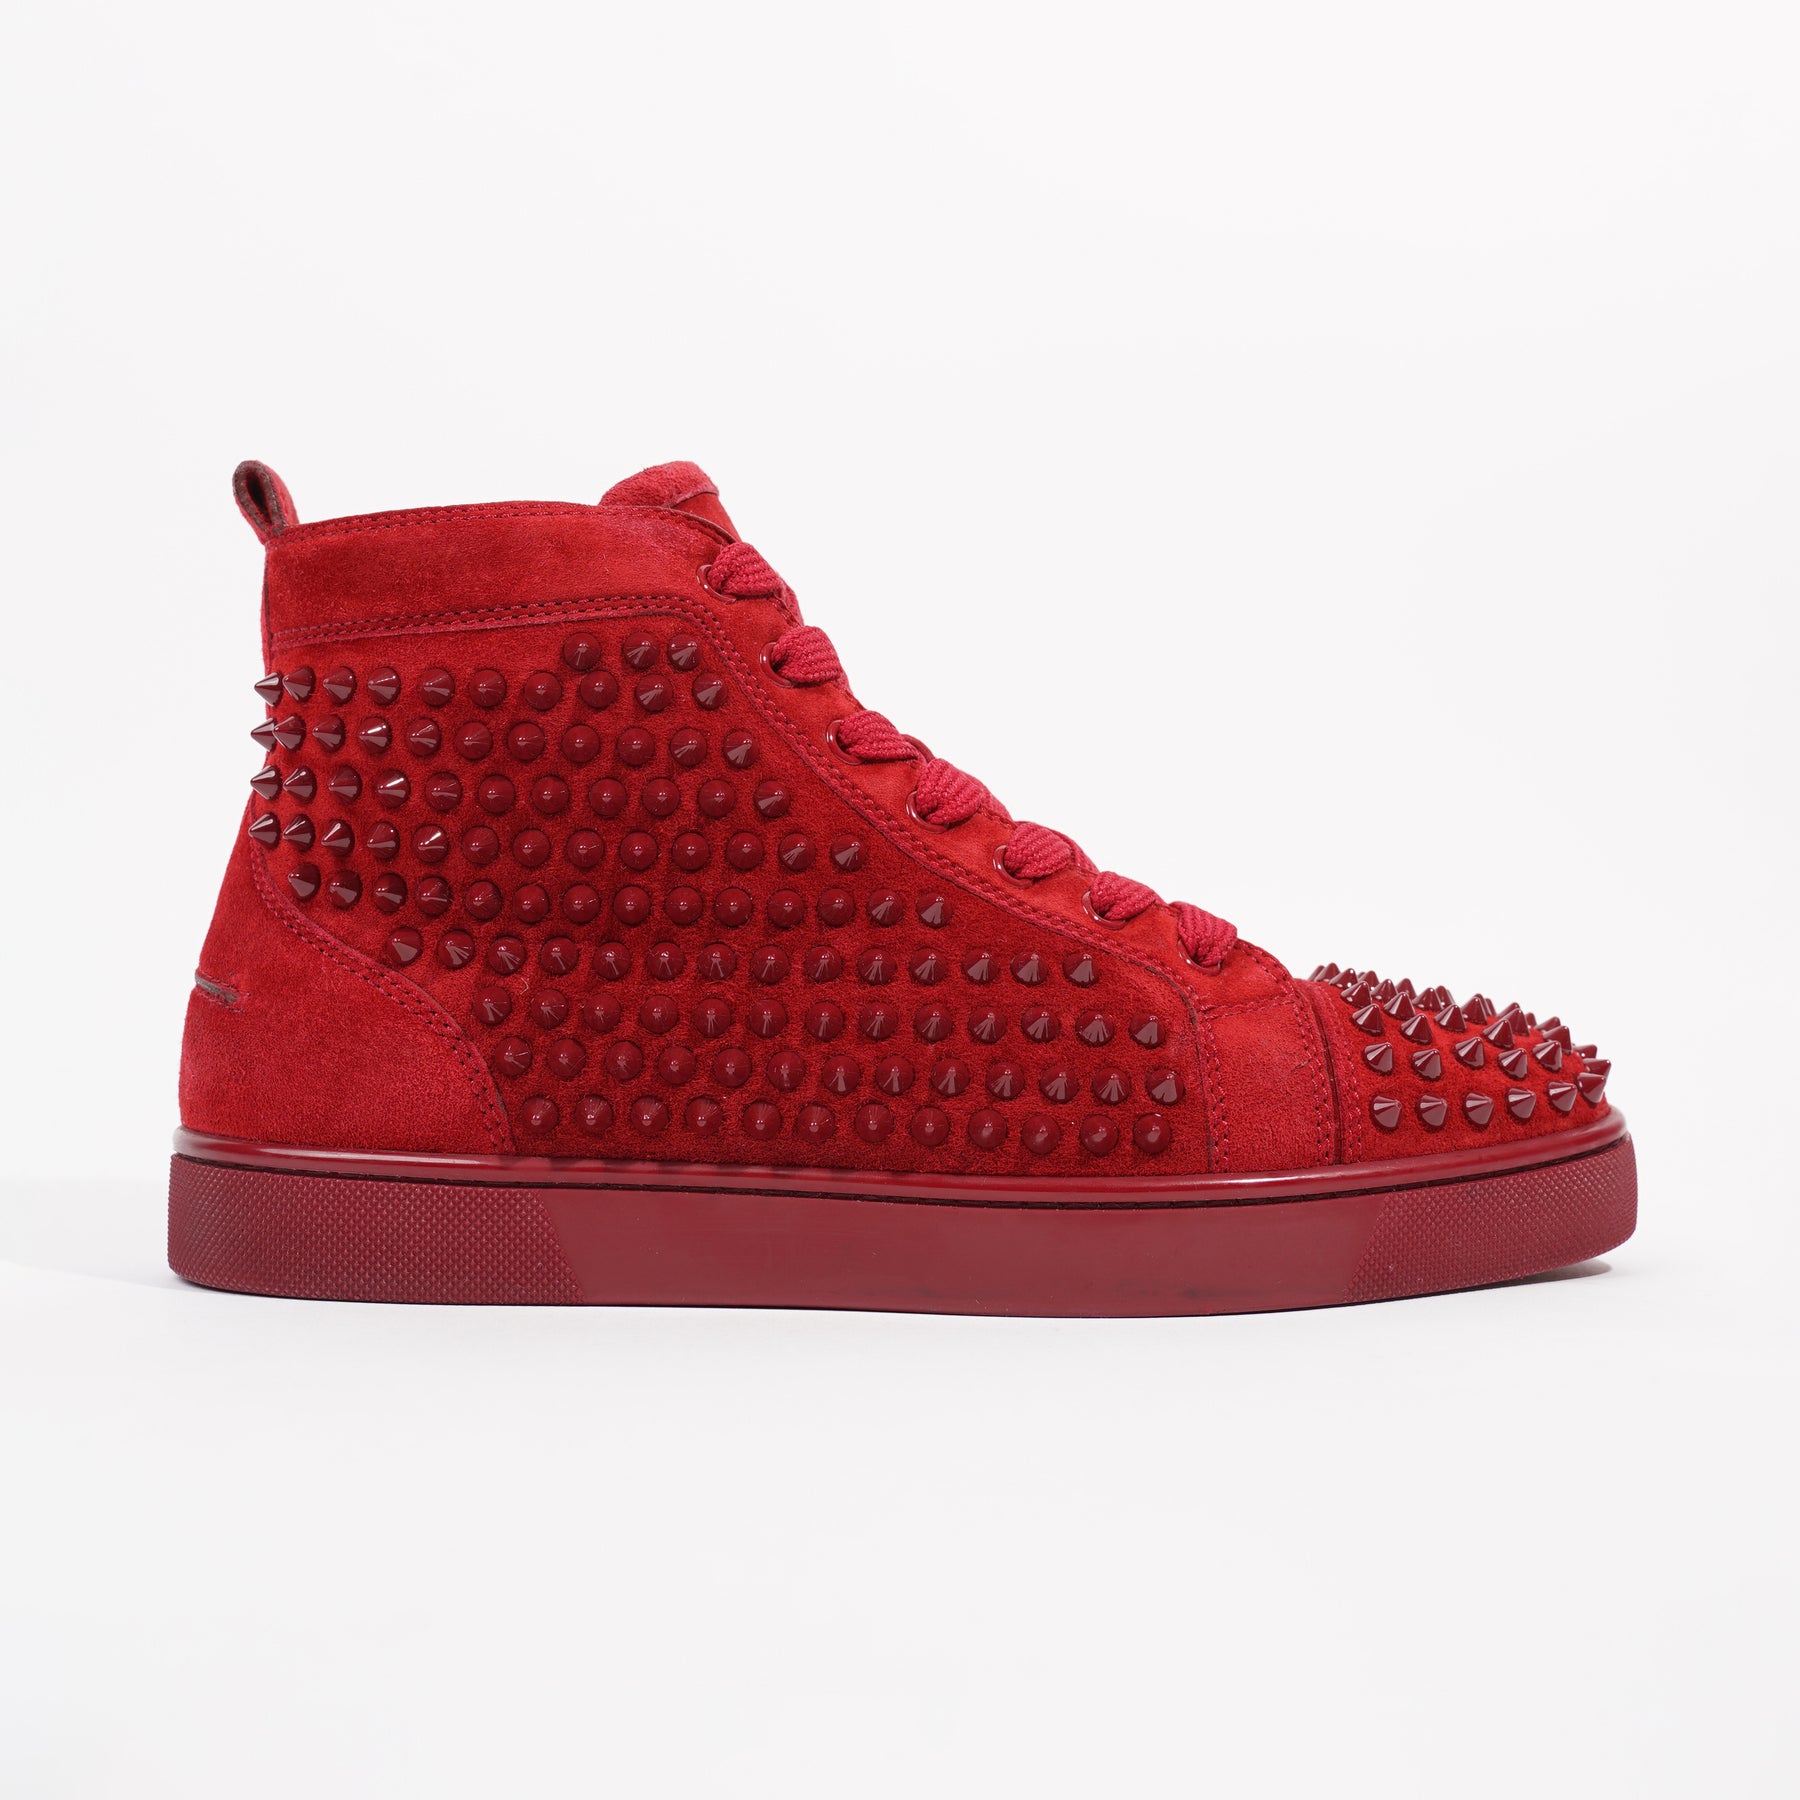 CHRISTIAN LOUBOUTIN WOMEN'S CRAZY SPIKED HIGH TOP SNEAKERS-SIZE 7